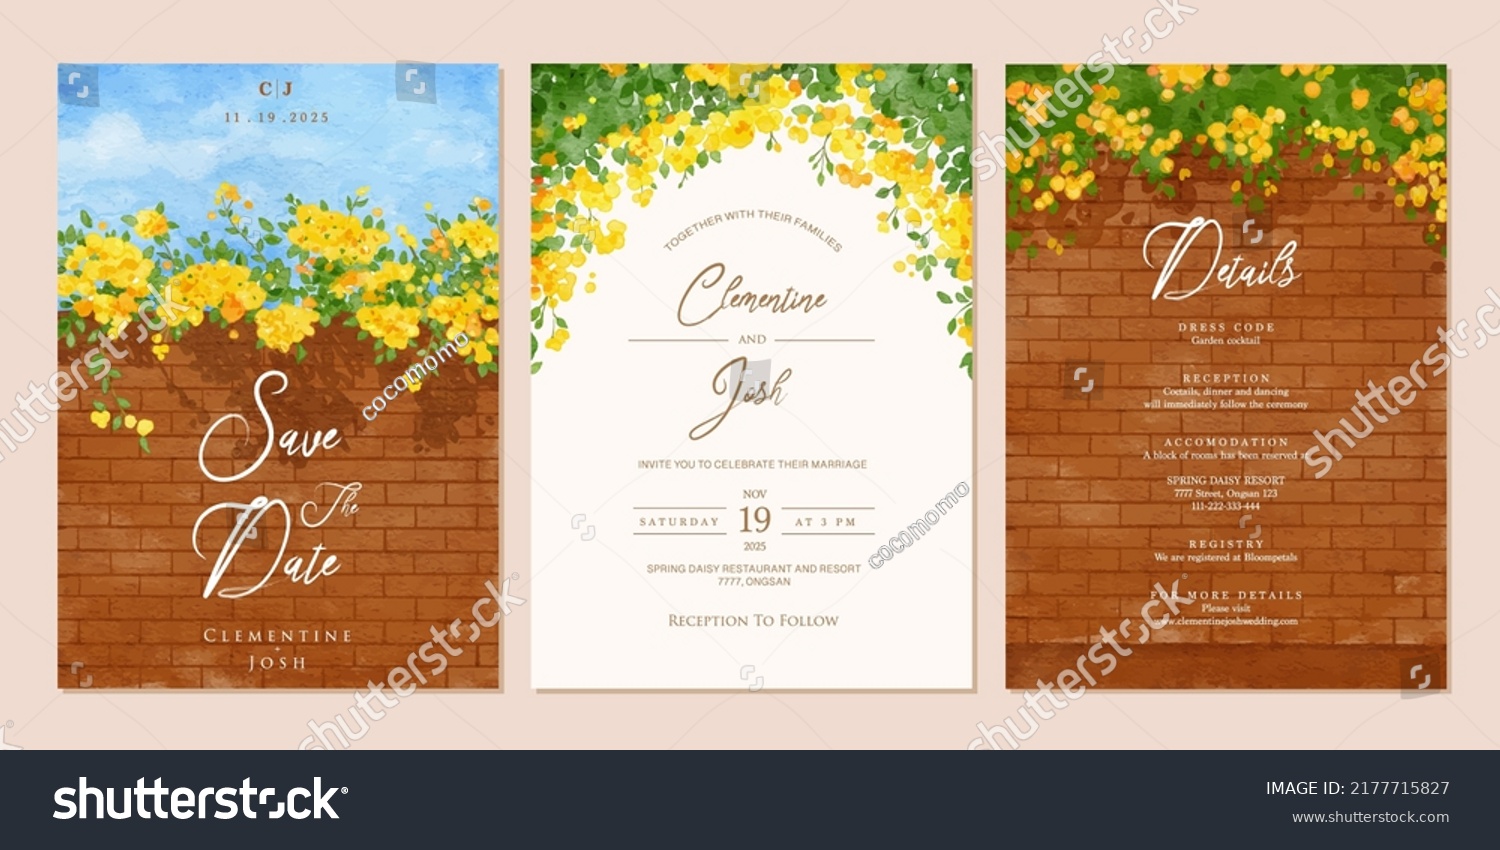 SVG of set of wedding invitation template with watercolor yellow bougainvillea flower brick wall landscape svg